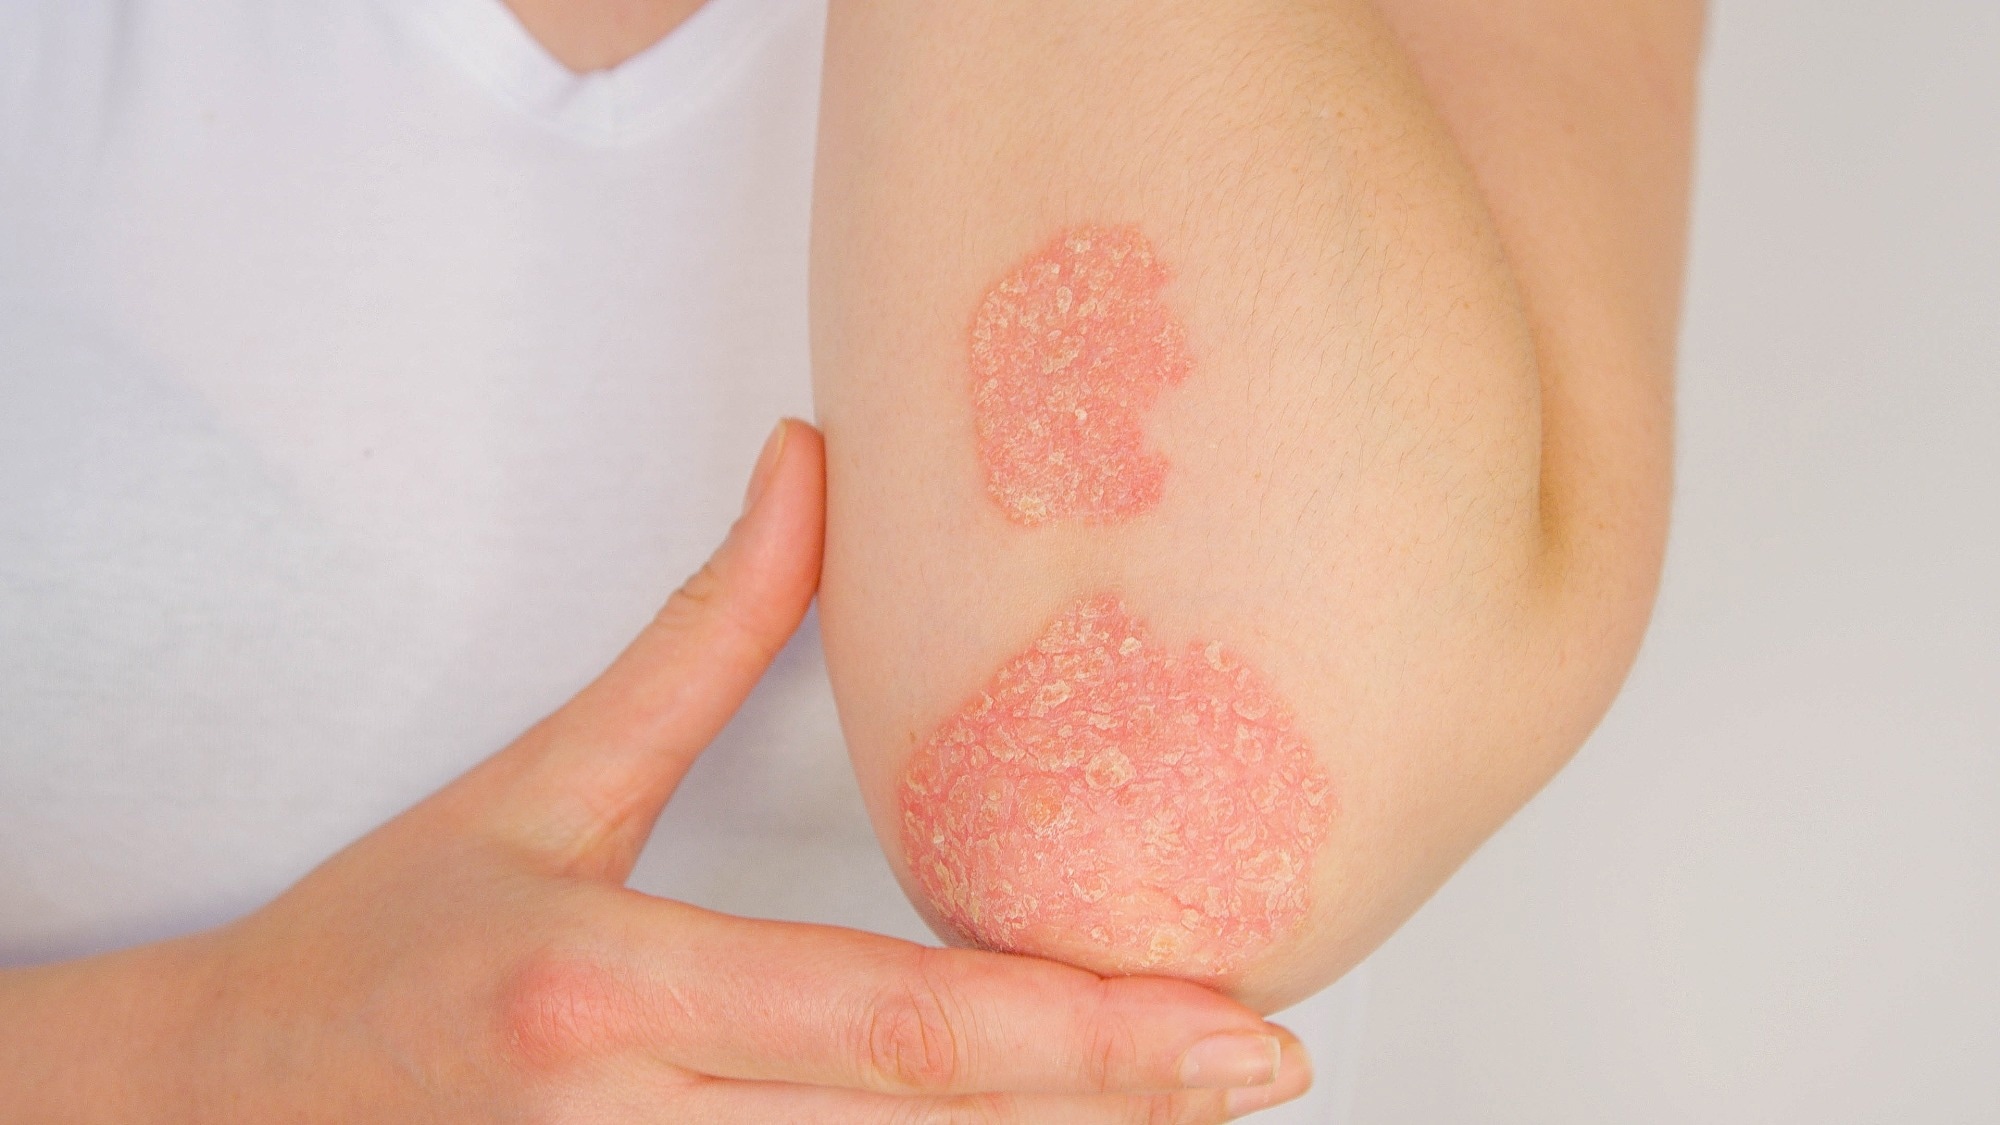 Study: Risk of incident autoimmune diseases in patients with newly diagnosed psoriatic disease: a nationwide population-based study. Image Credit: Flystock/Shutterstock.com